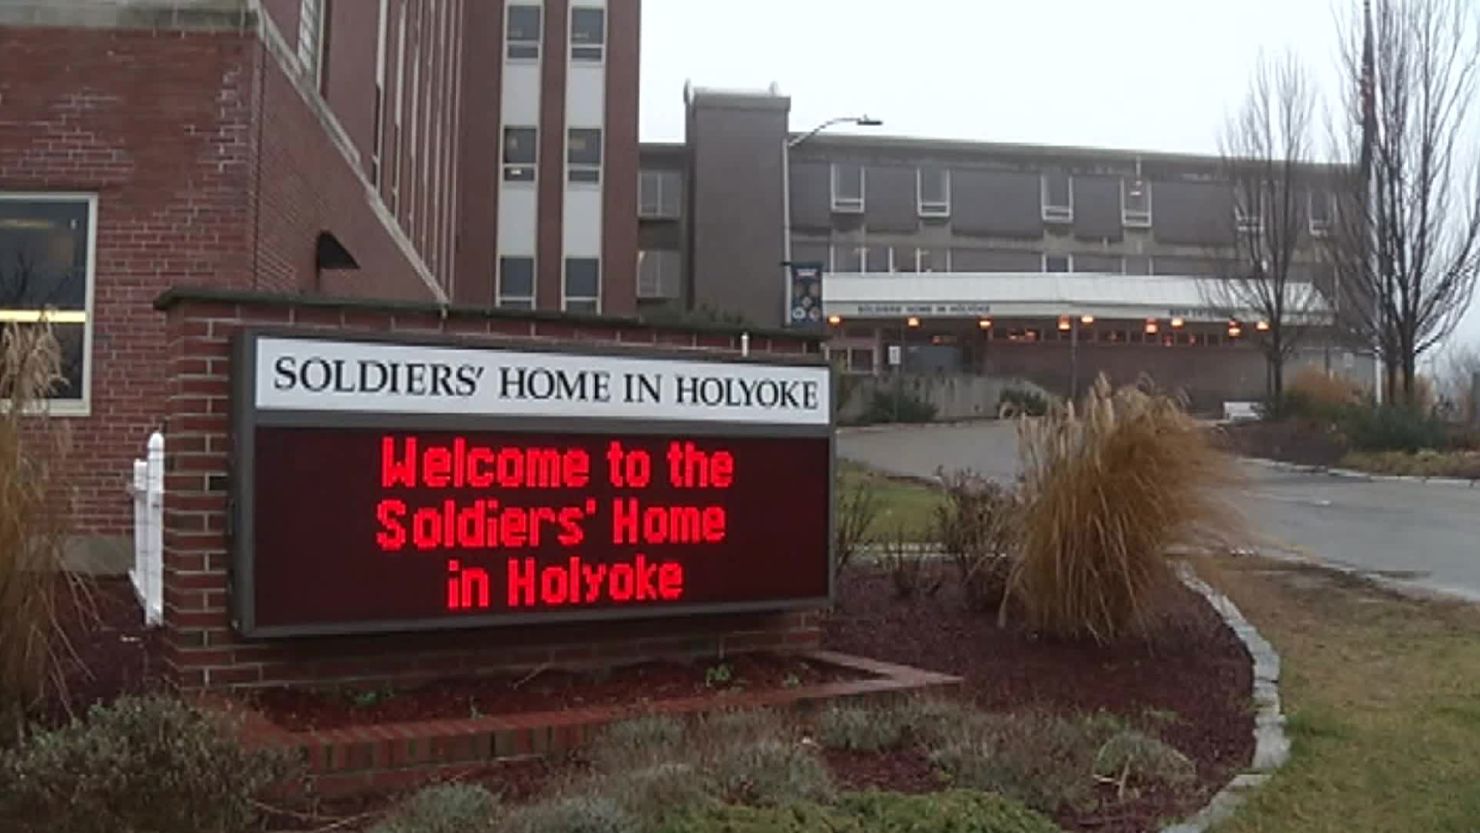 The Soldiers' Home in Holyoke is a health care facility for veterans in Massachusetts.